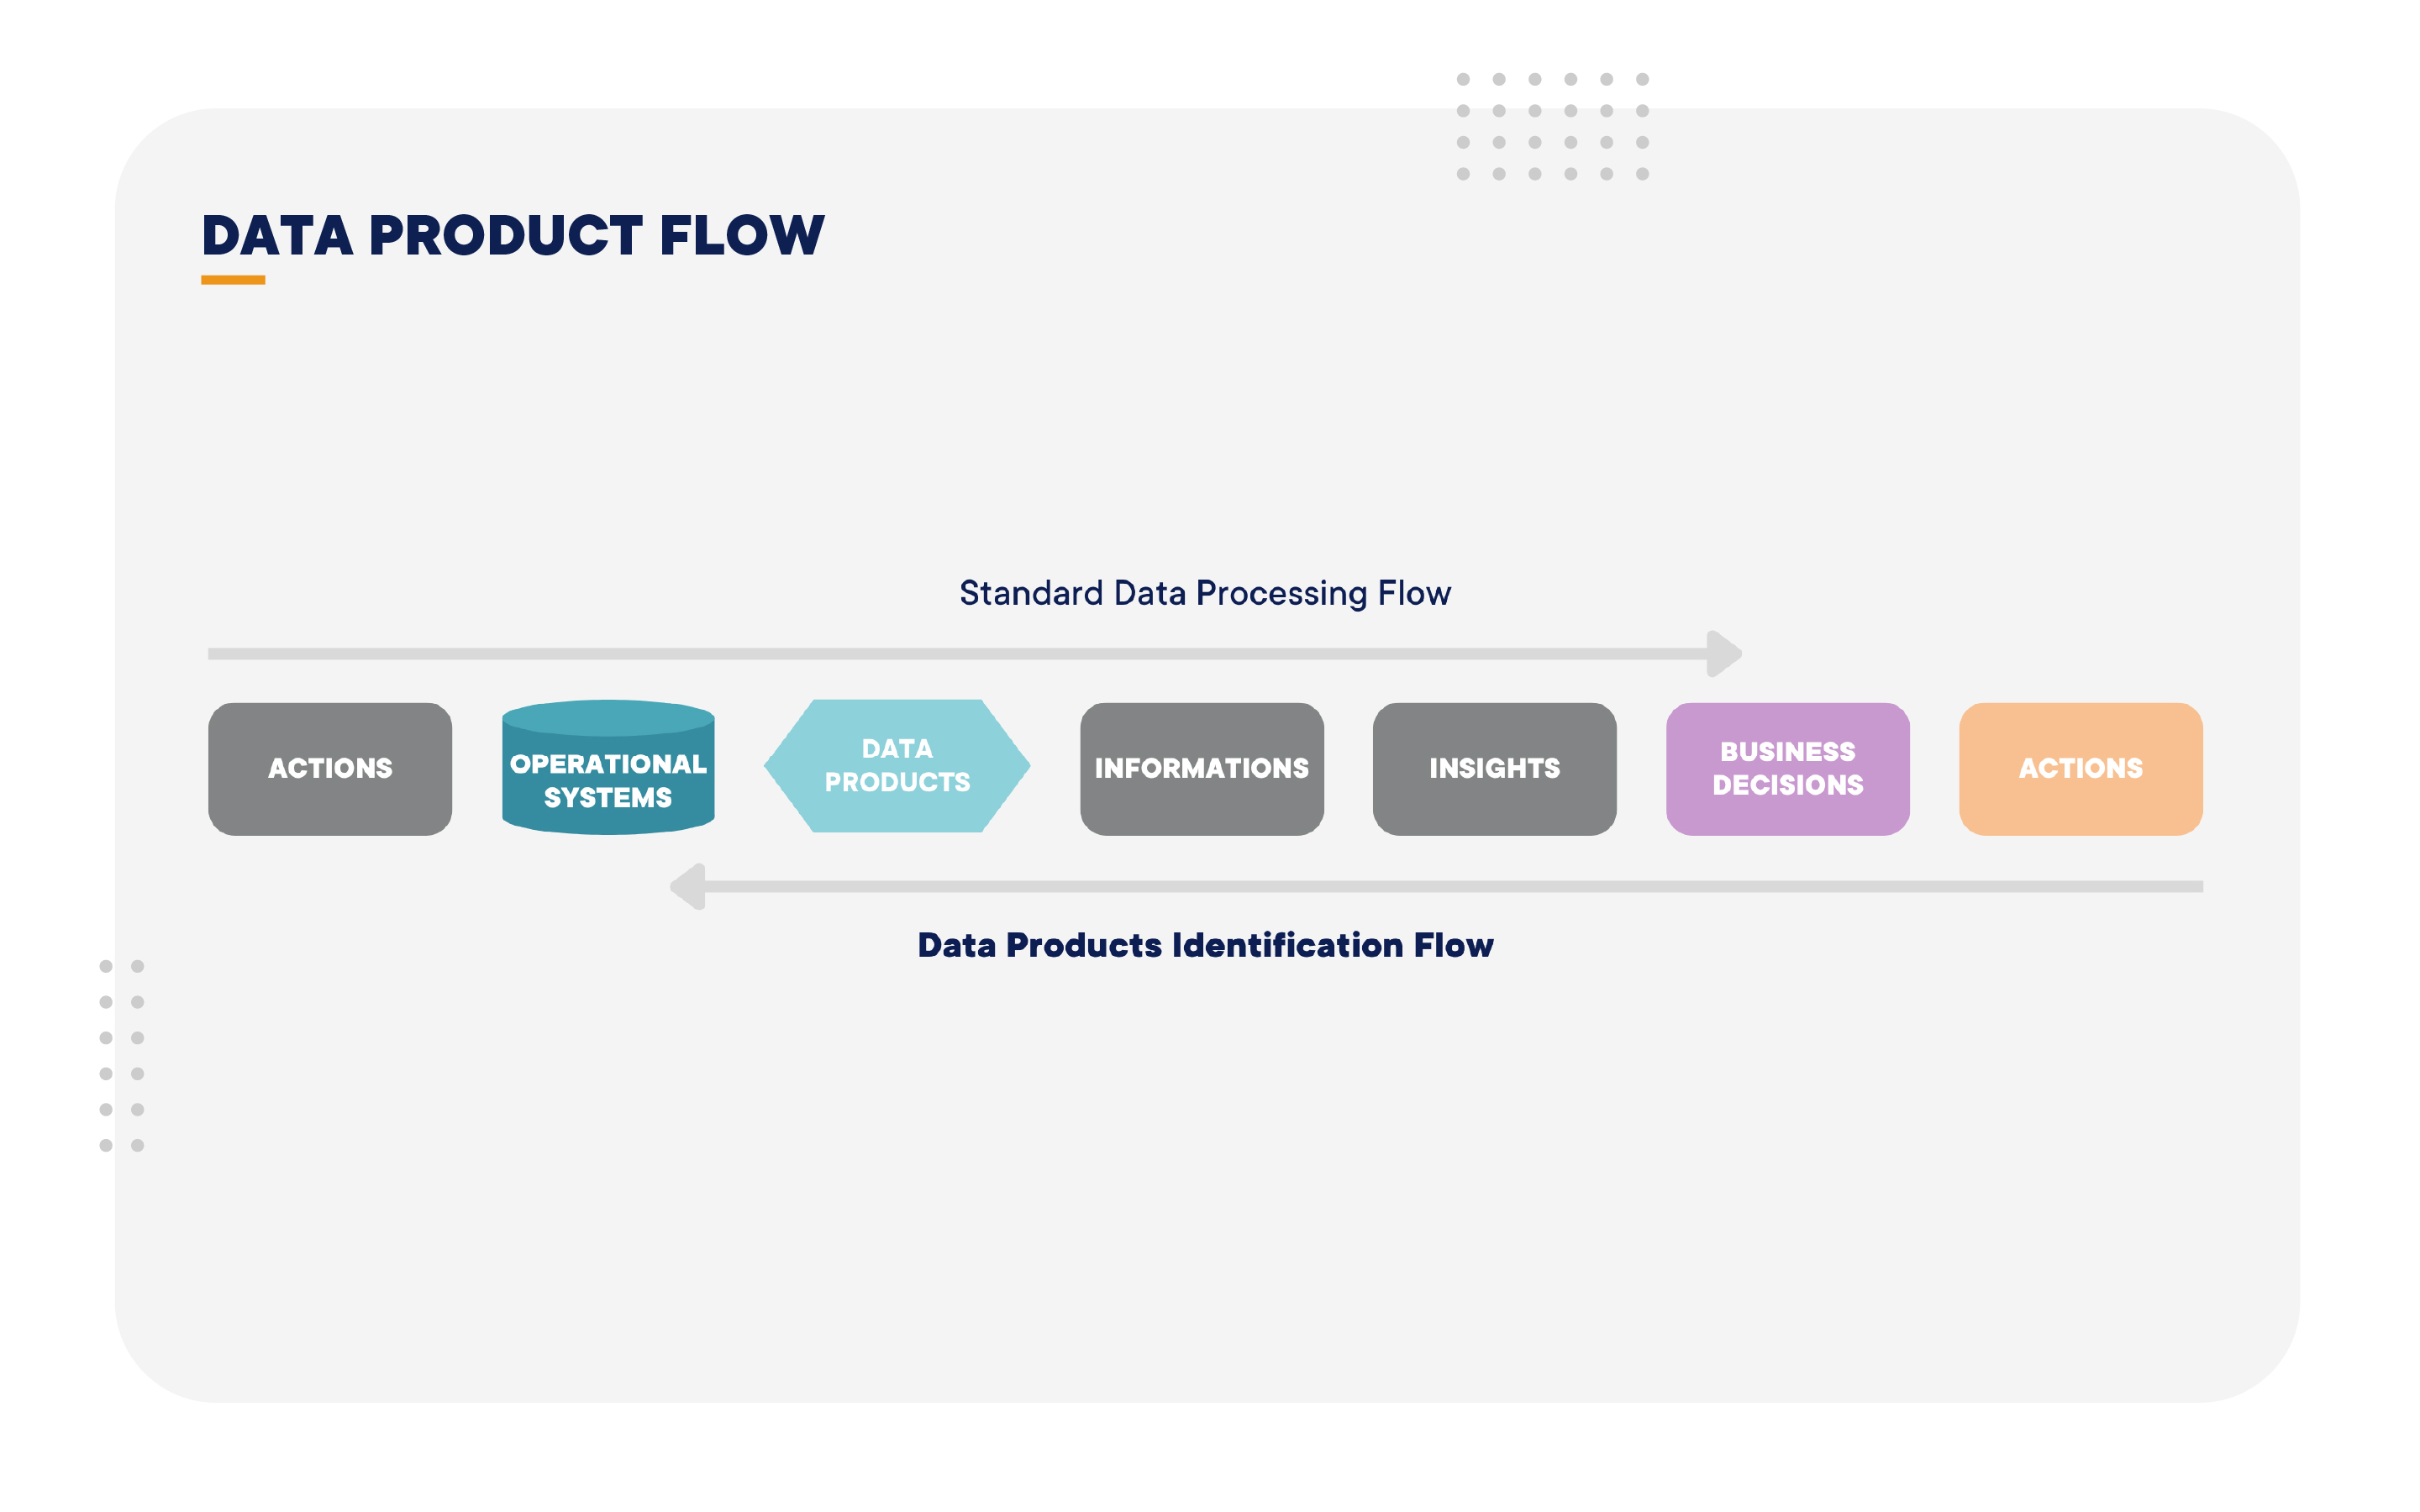 DATA PRODUCT FLOW